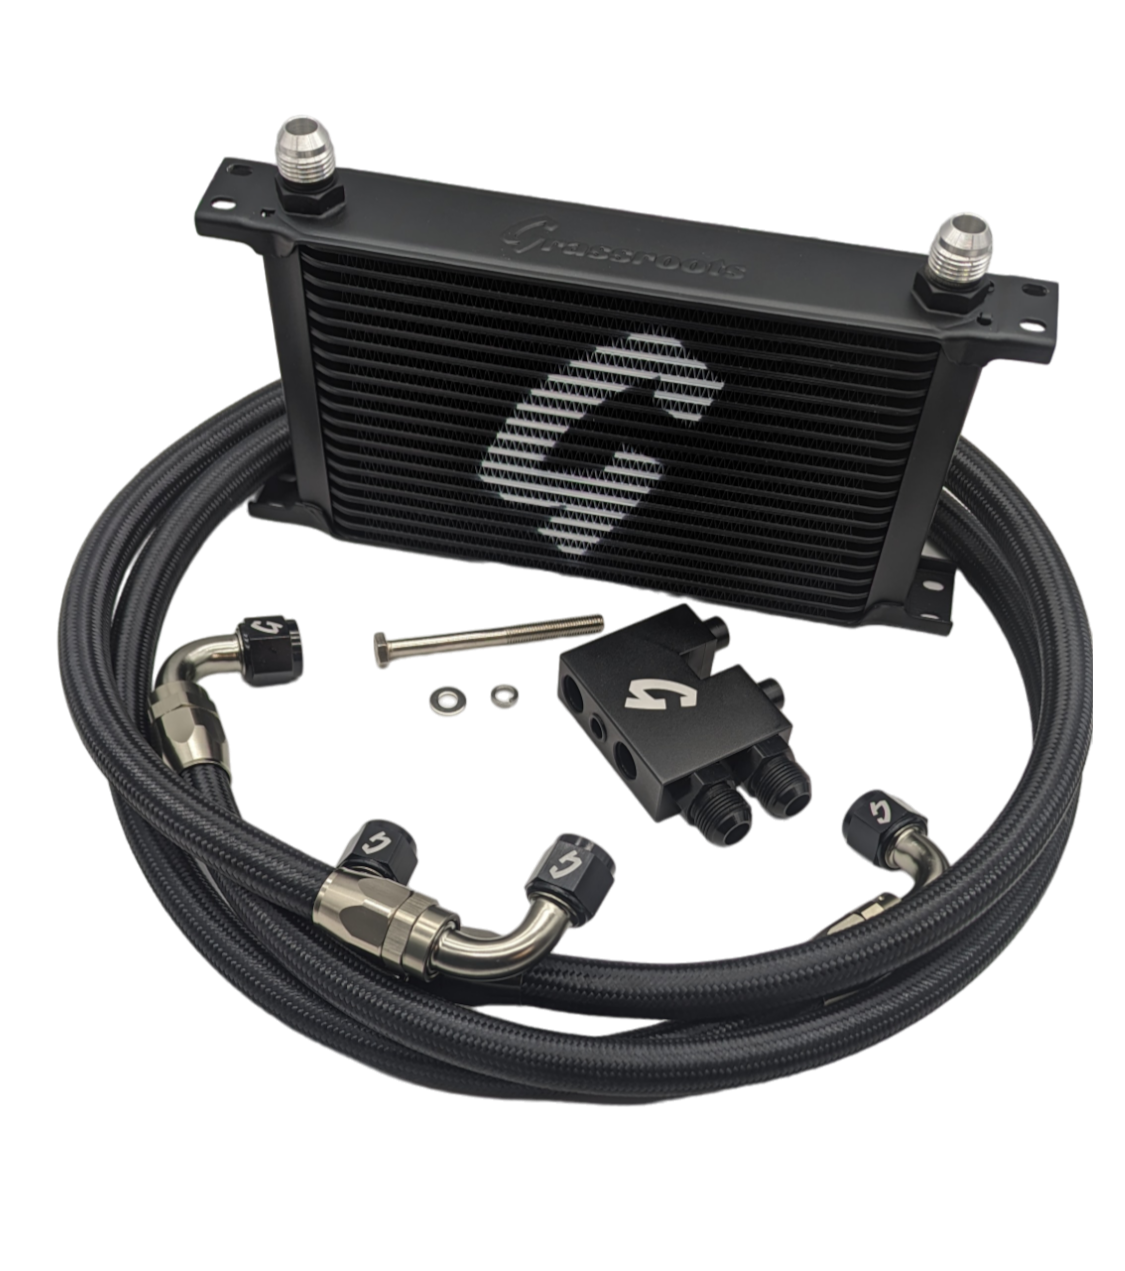 side angle view of BMW E82/E90/E92/E93 N54 Direct-Fit 19-Row Oil Cooler Kit